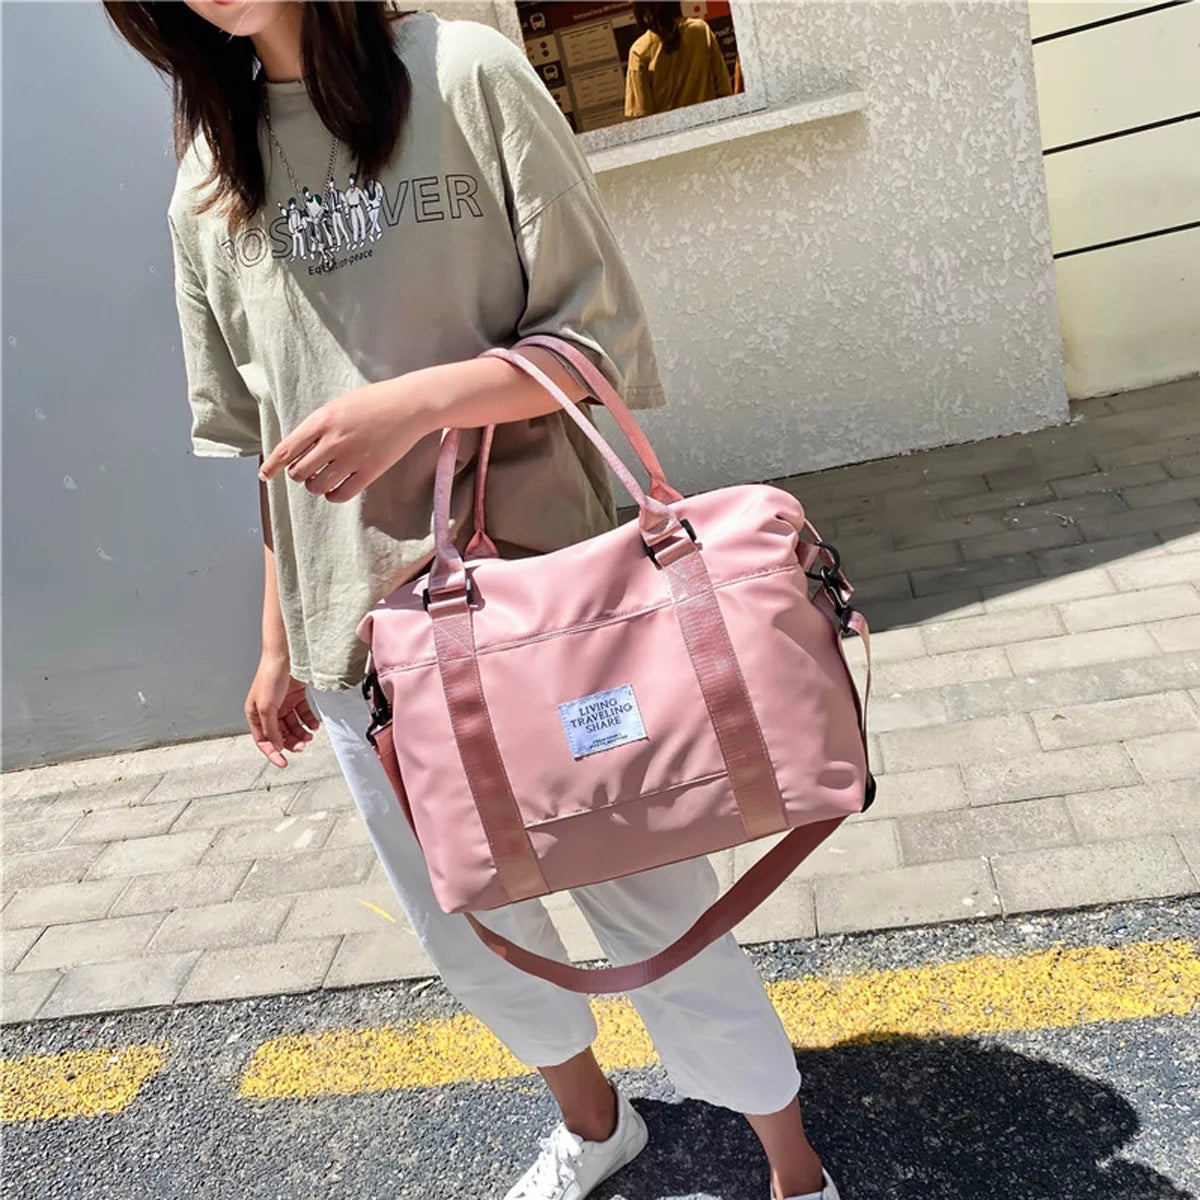 Travel Duffel Bag Sports Tote Gym Bag Shoulder Weekender Overnight Bag for Women Gym Accessories for Women